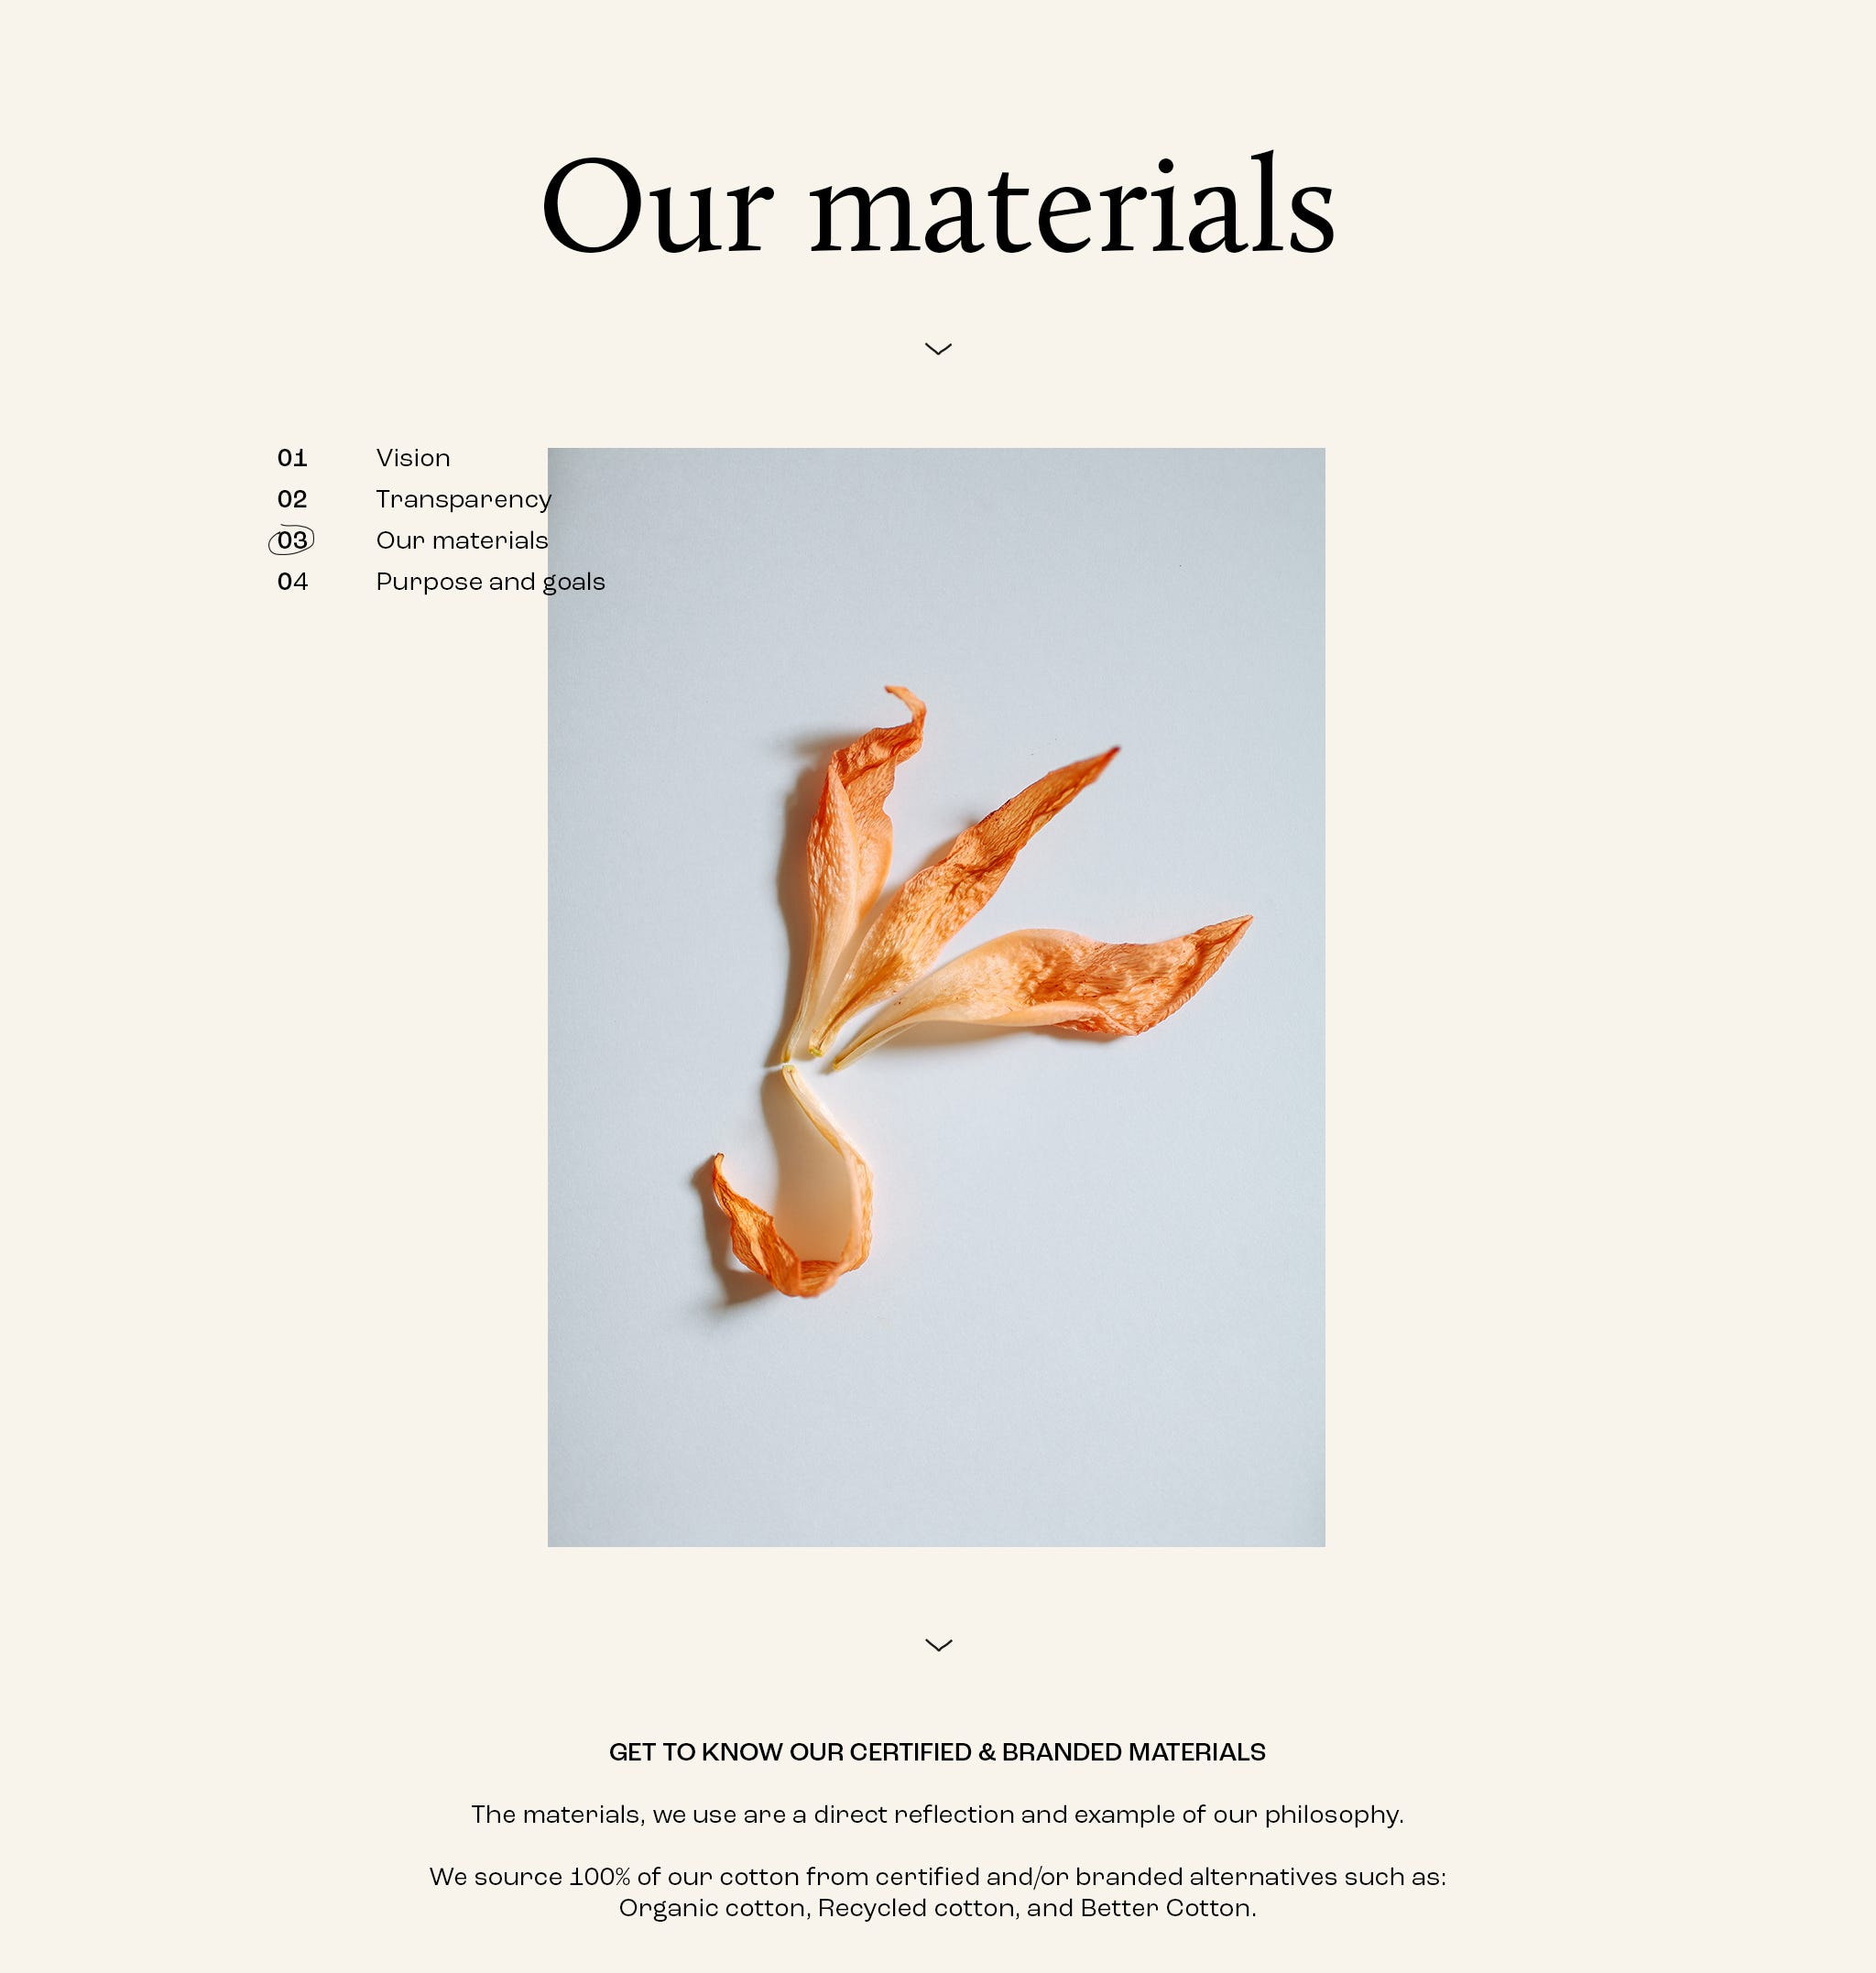 ourmaterials01.jpg